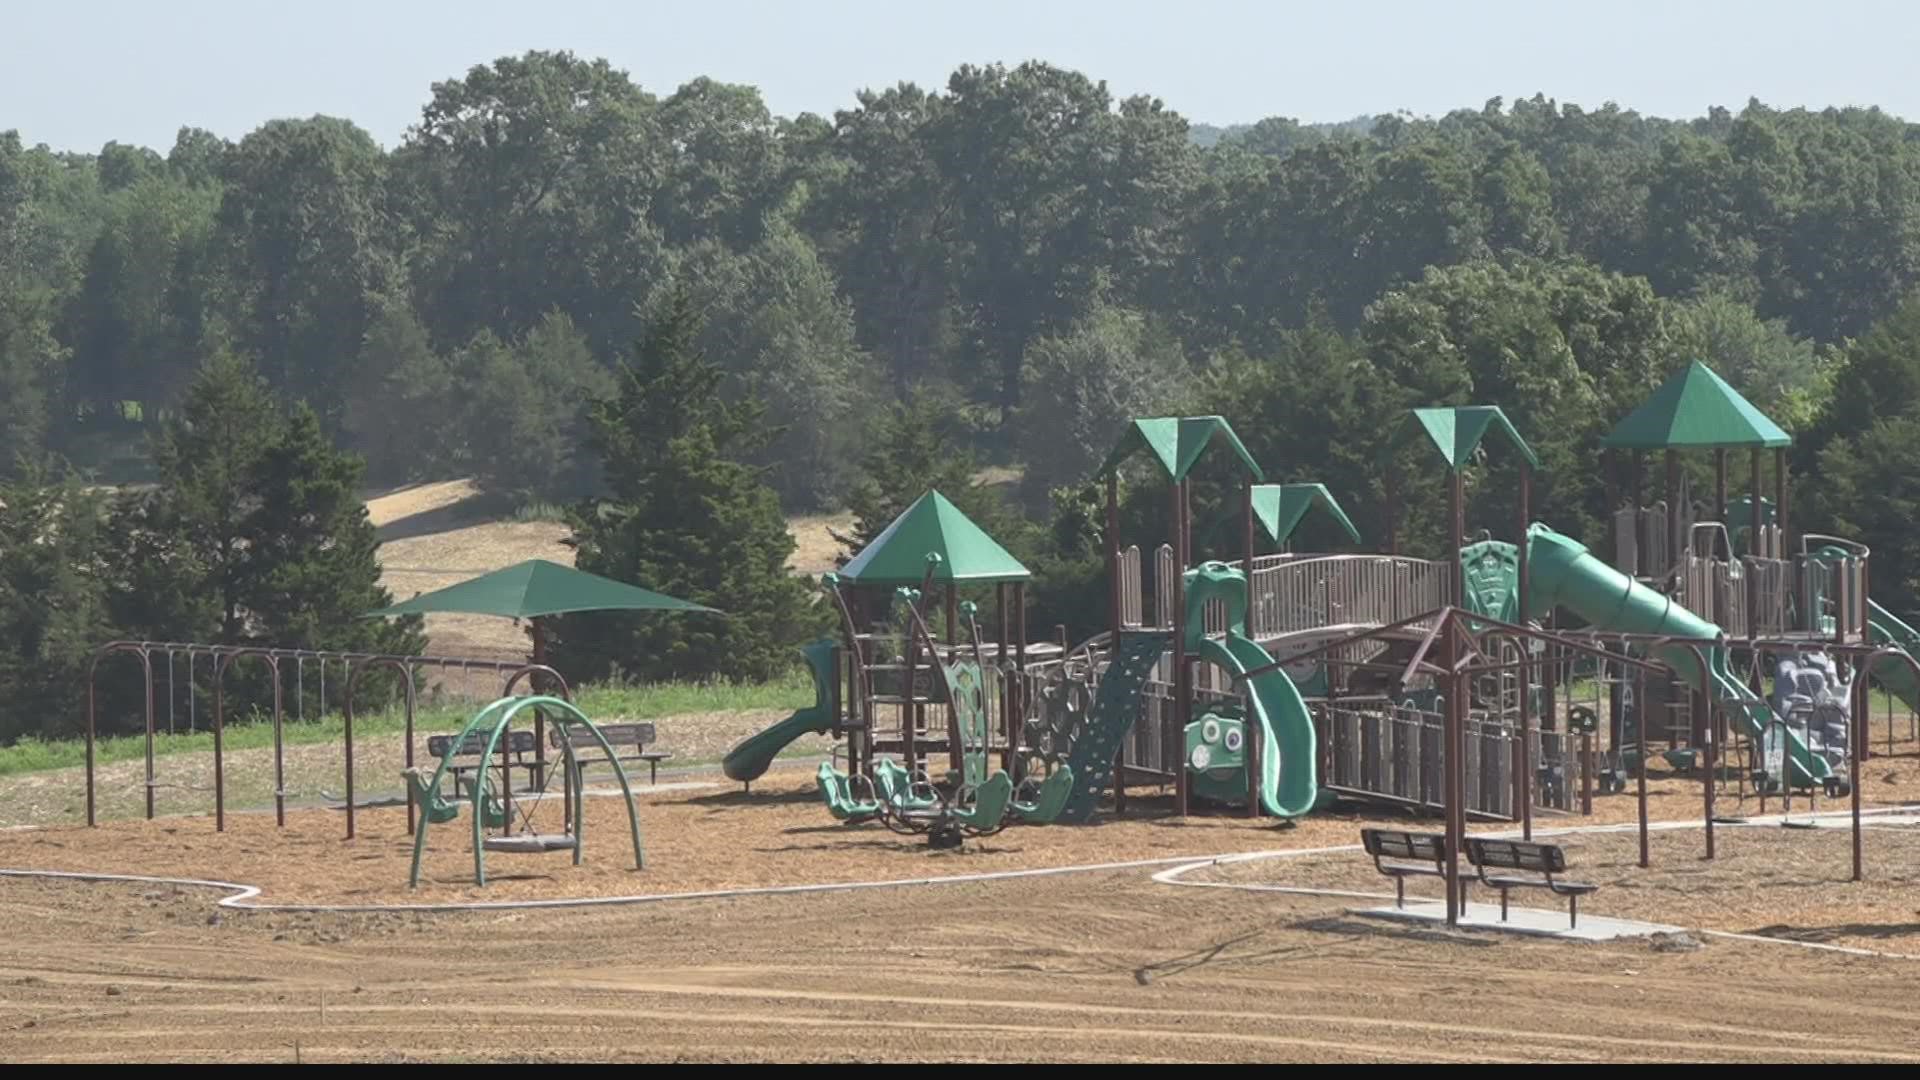 St. Charles County officials are opening the county’s 18th park on Saturday. It’s named after a historic figure who was little-known until recently.